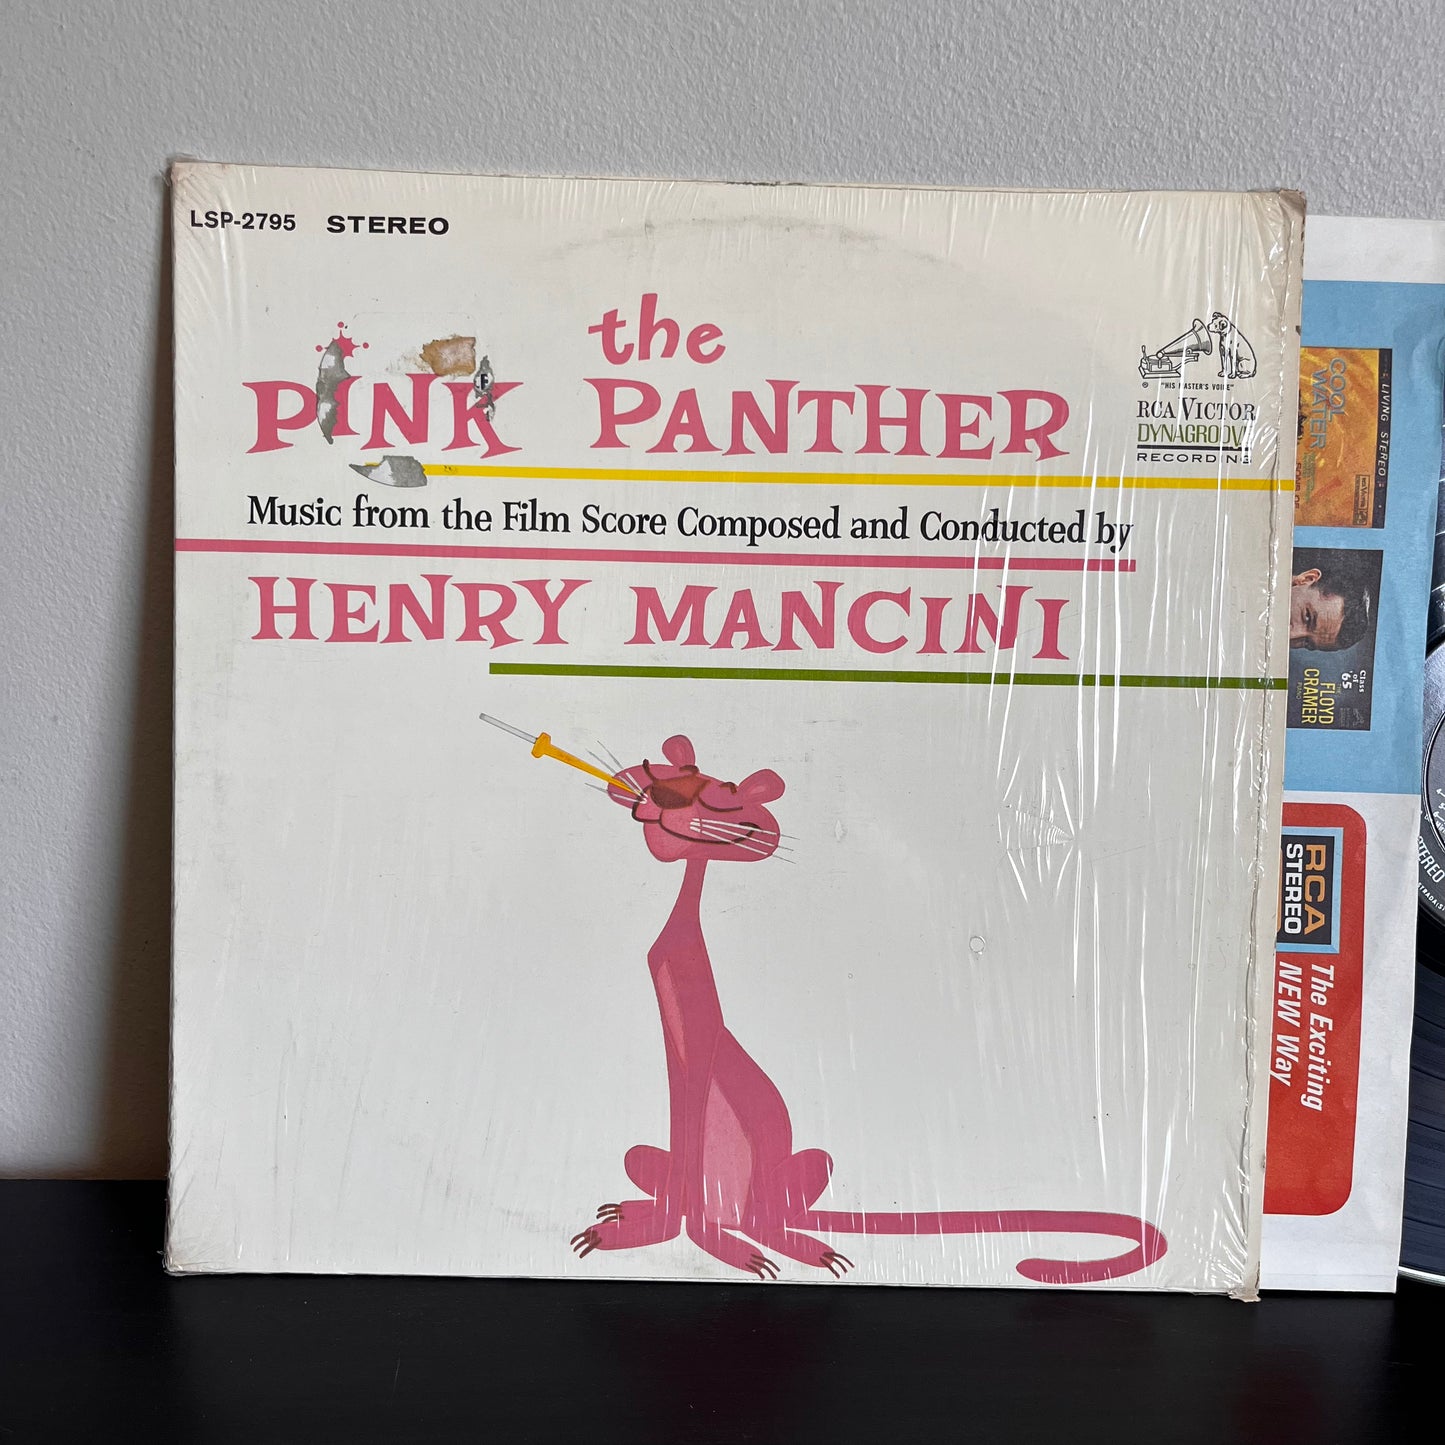 The Pink Panther - Henry Mancini Used Vinyl EX+/NM STEREO LSP-2795 1963 Open Seal